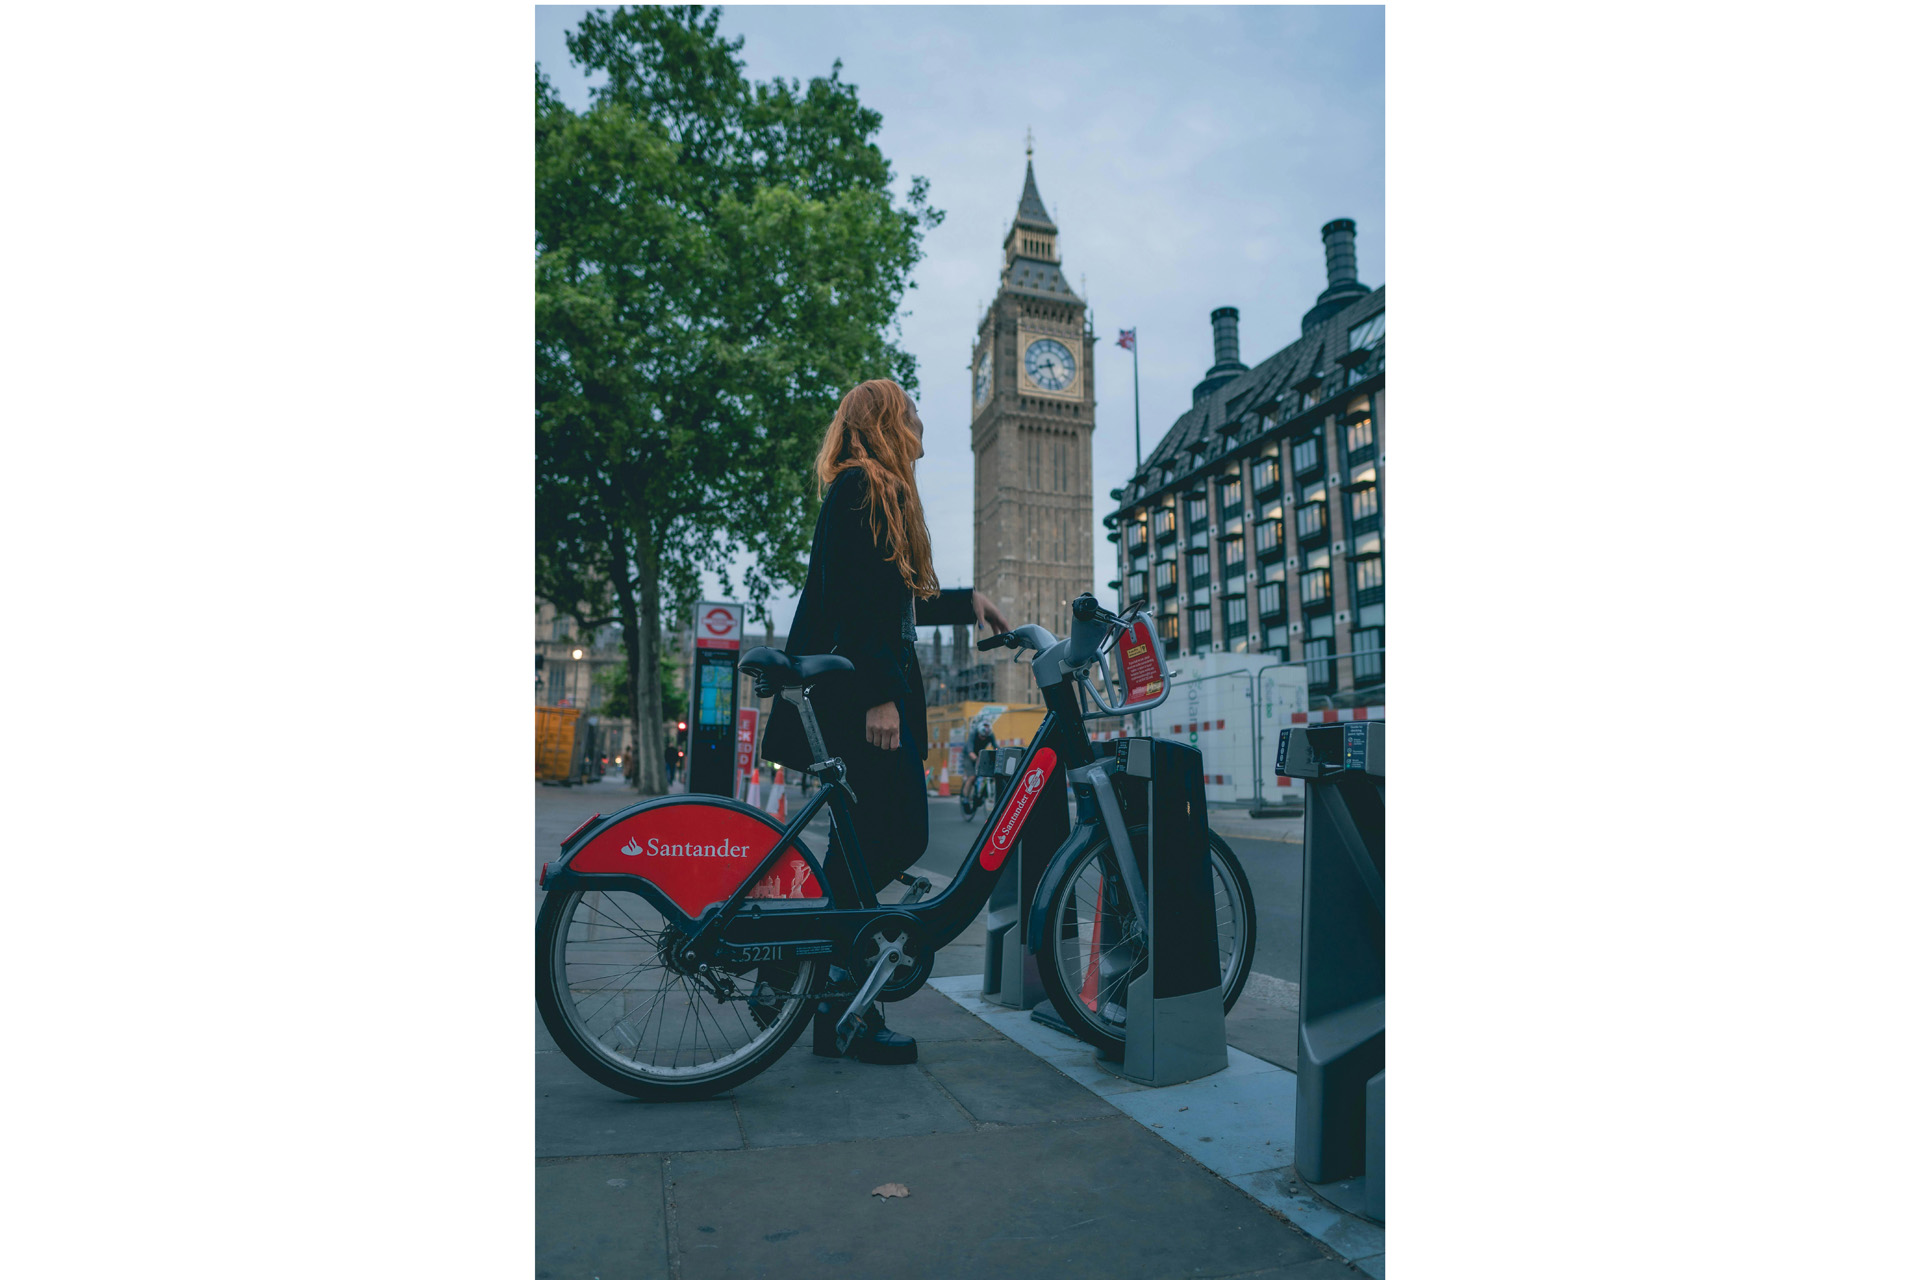 A woman stood with a bike in front of Big Ben